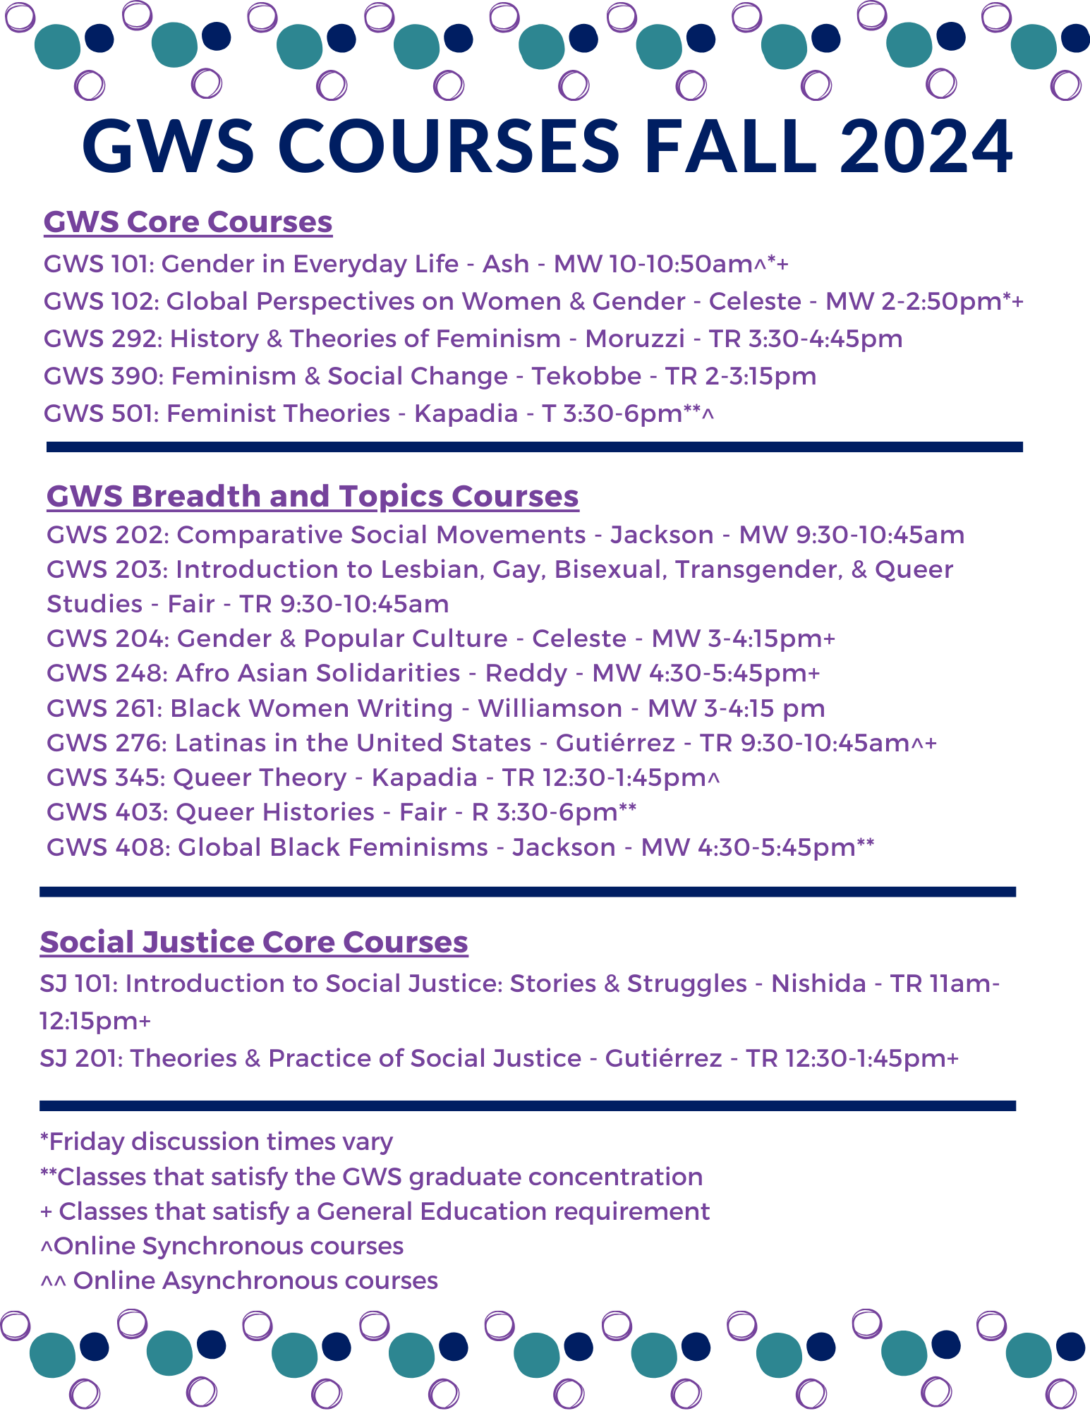 Small blue, teal, and purple circles form a border at the top and bottom of the flier. The heading GWS Courses Fall 2024 appears in dark blue text beneath the top border. Under the heading, GWS and Social Justice courses are listed in purple text.